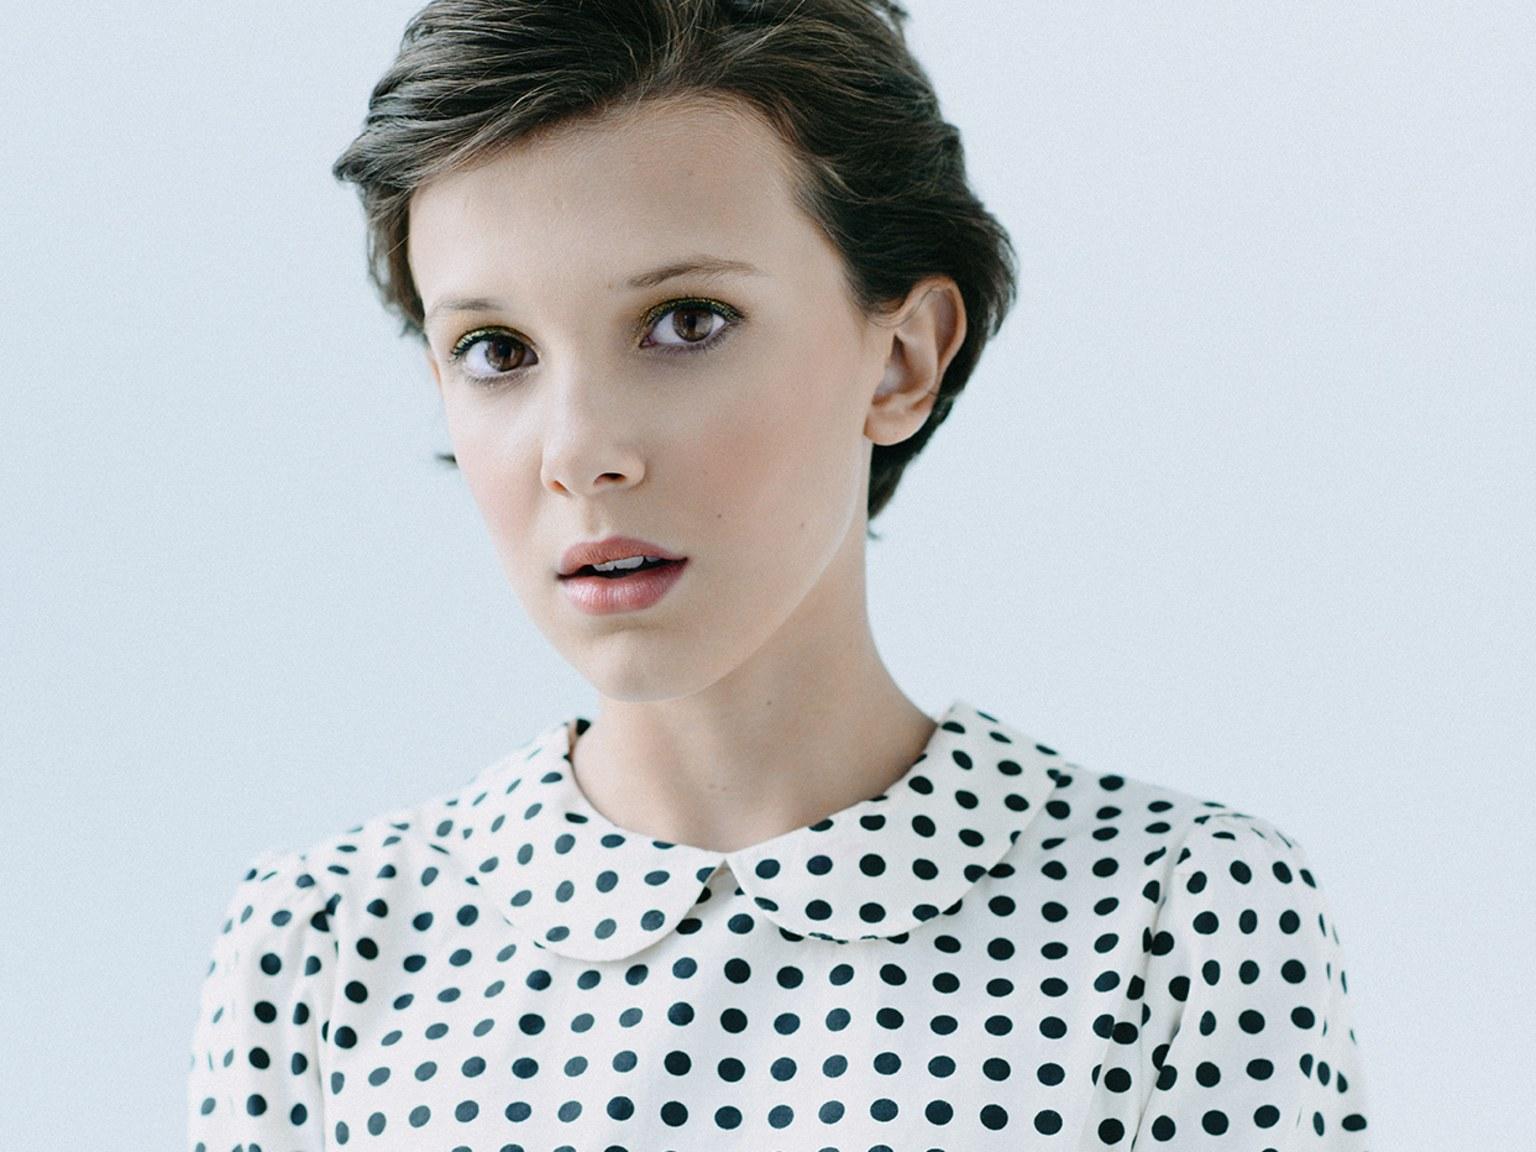 Like Eleven, Millie Bobby Brown Can Be Very Badass